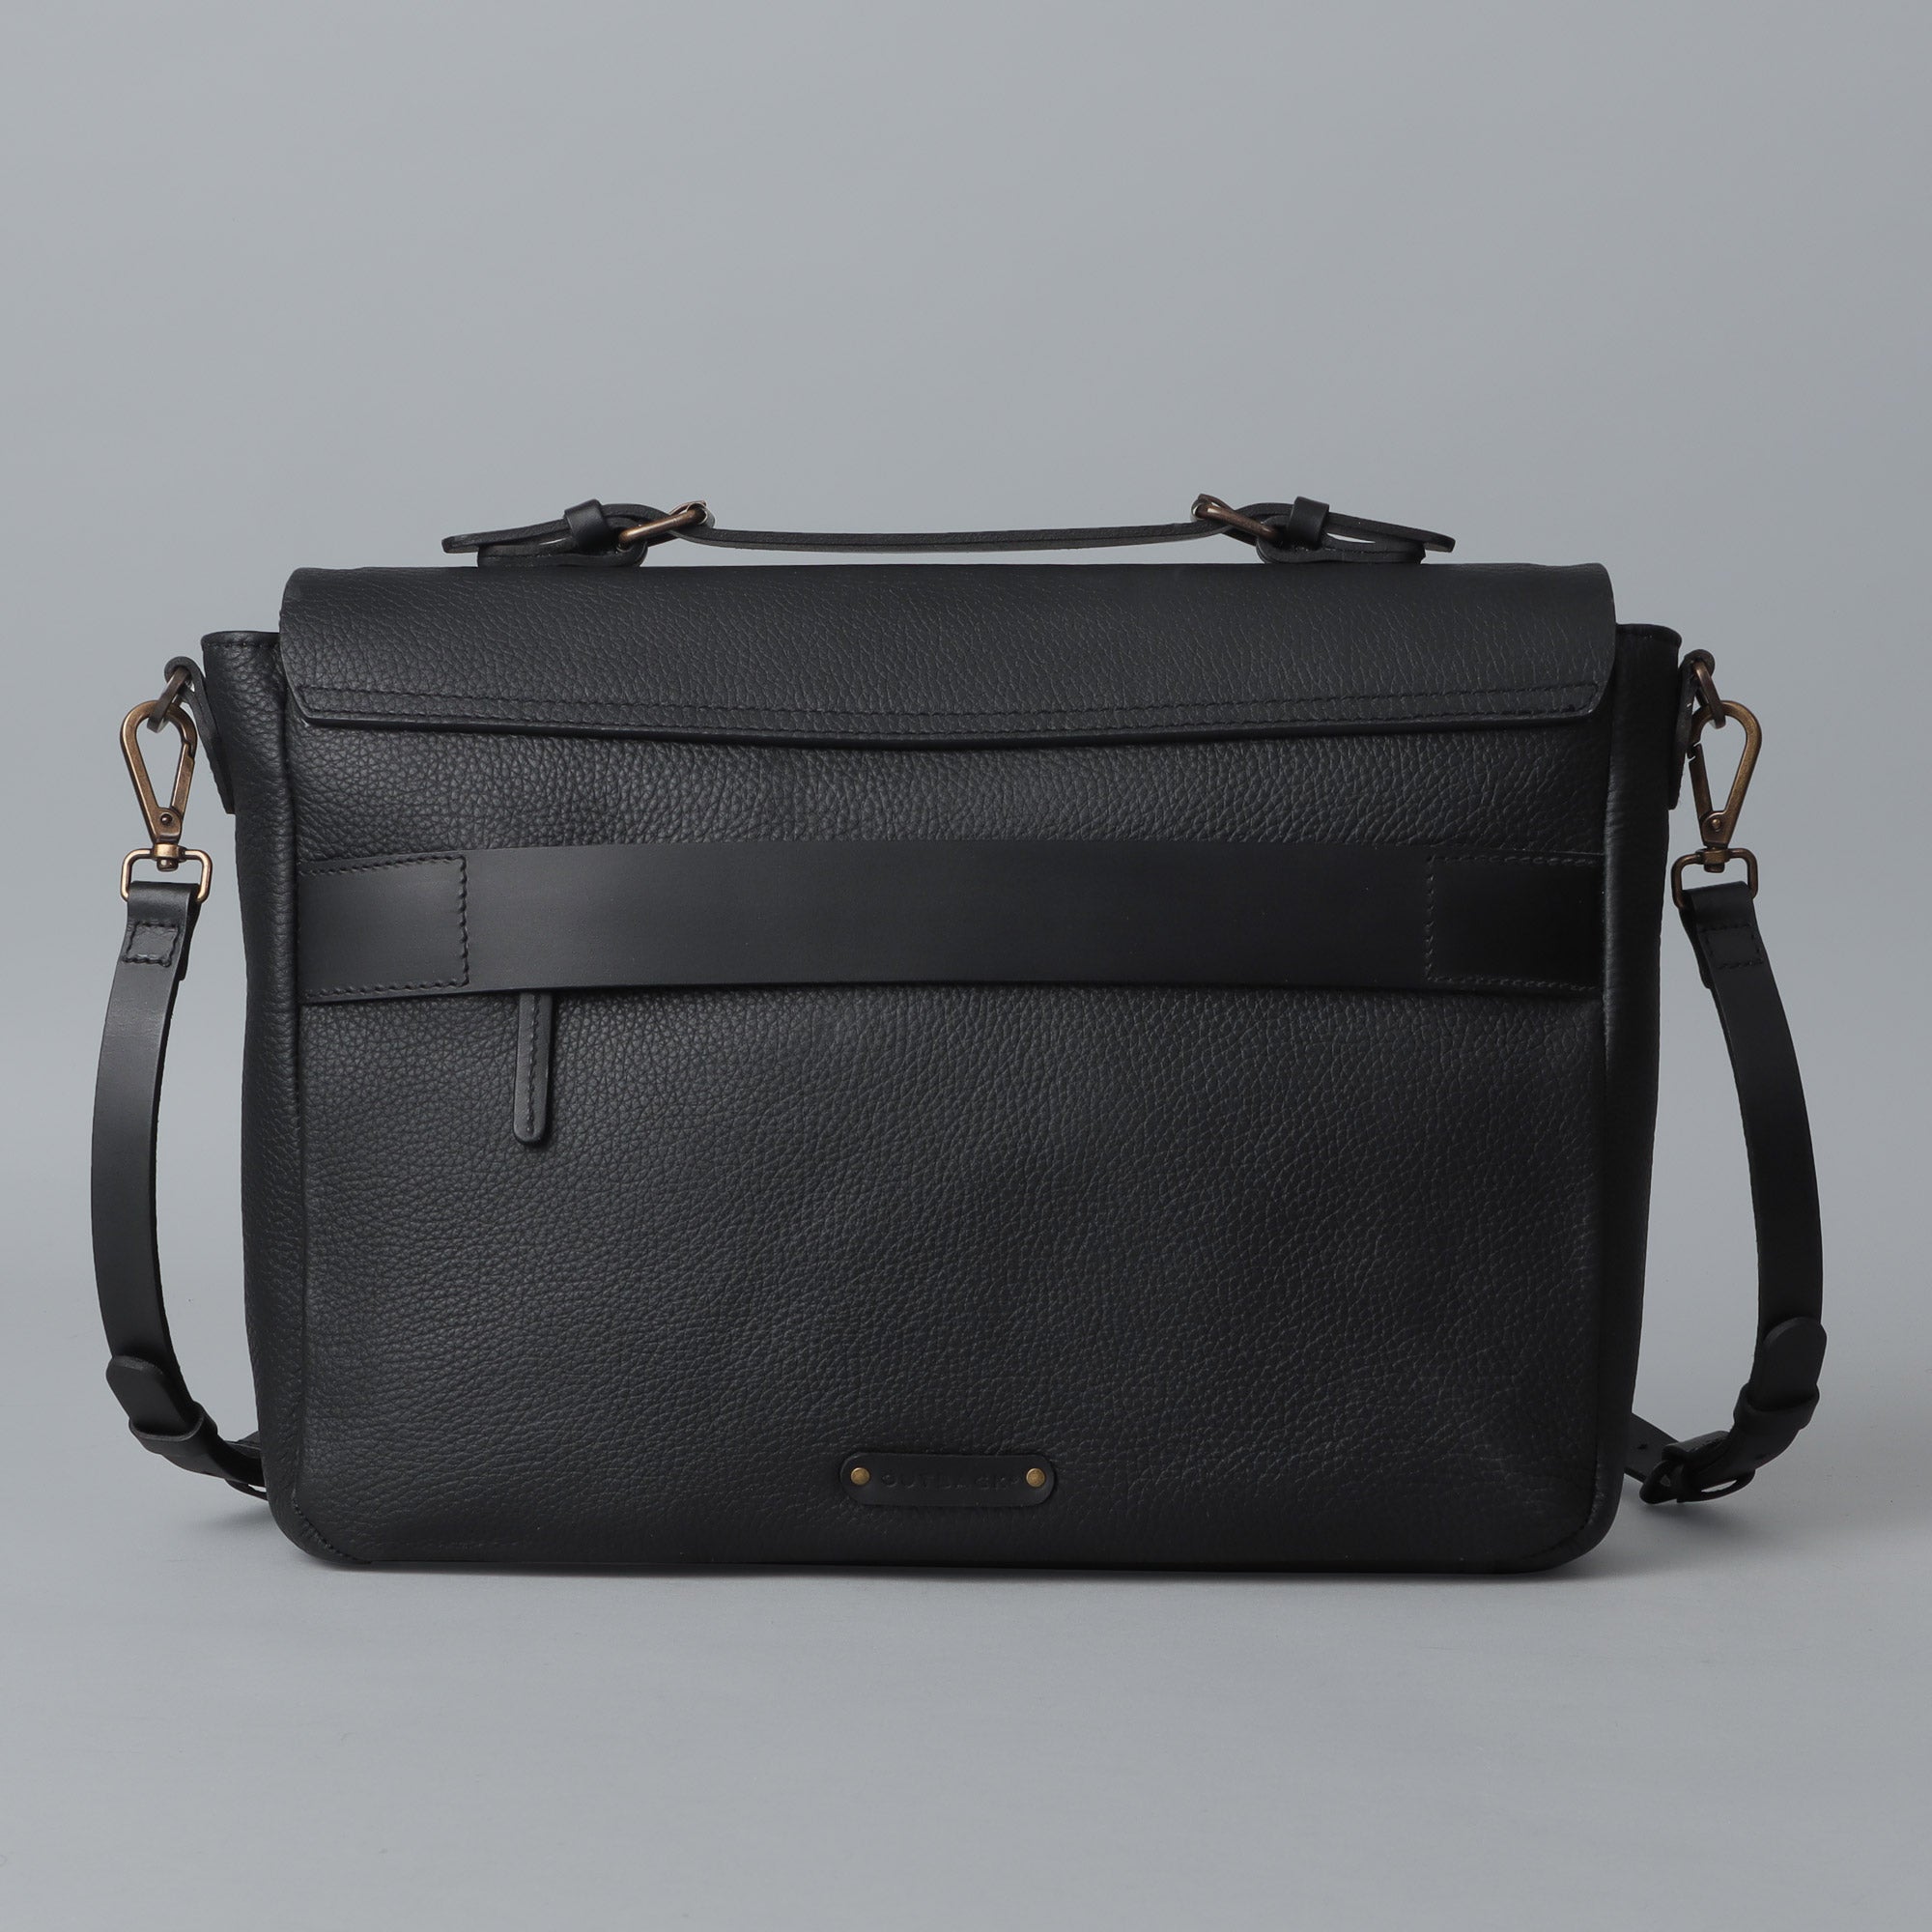 Stylish briefcase made of genuine leather